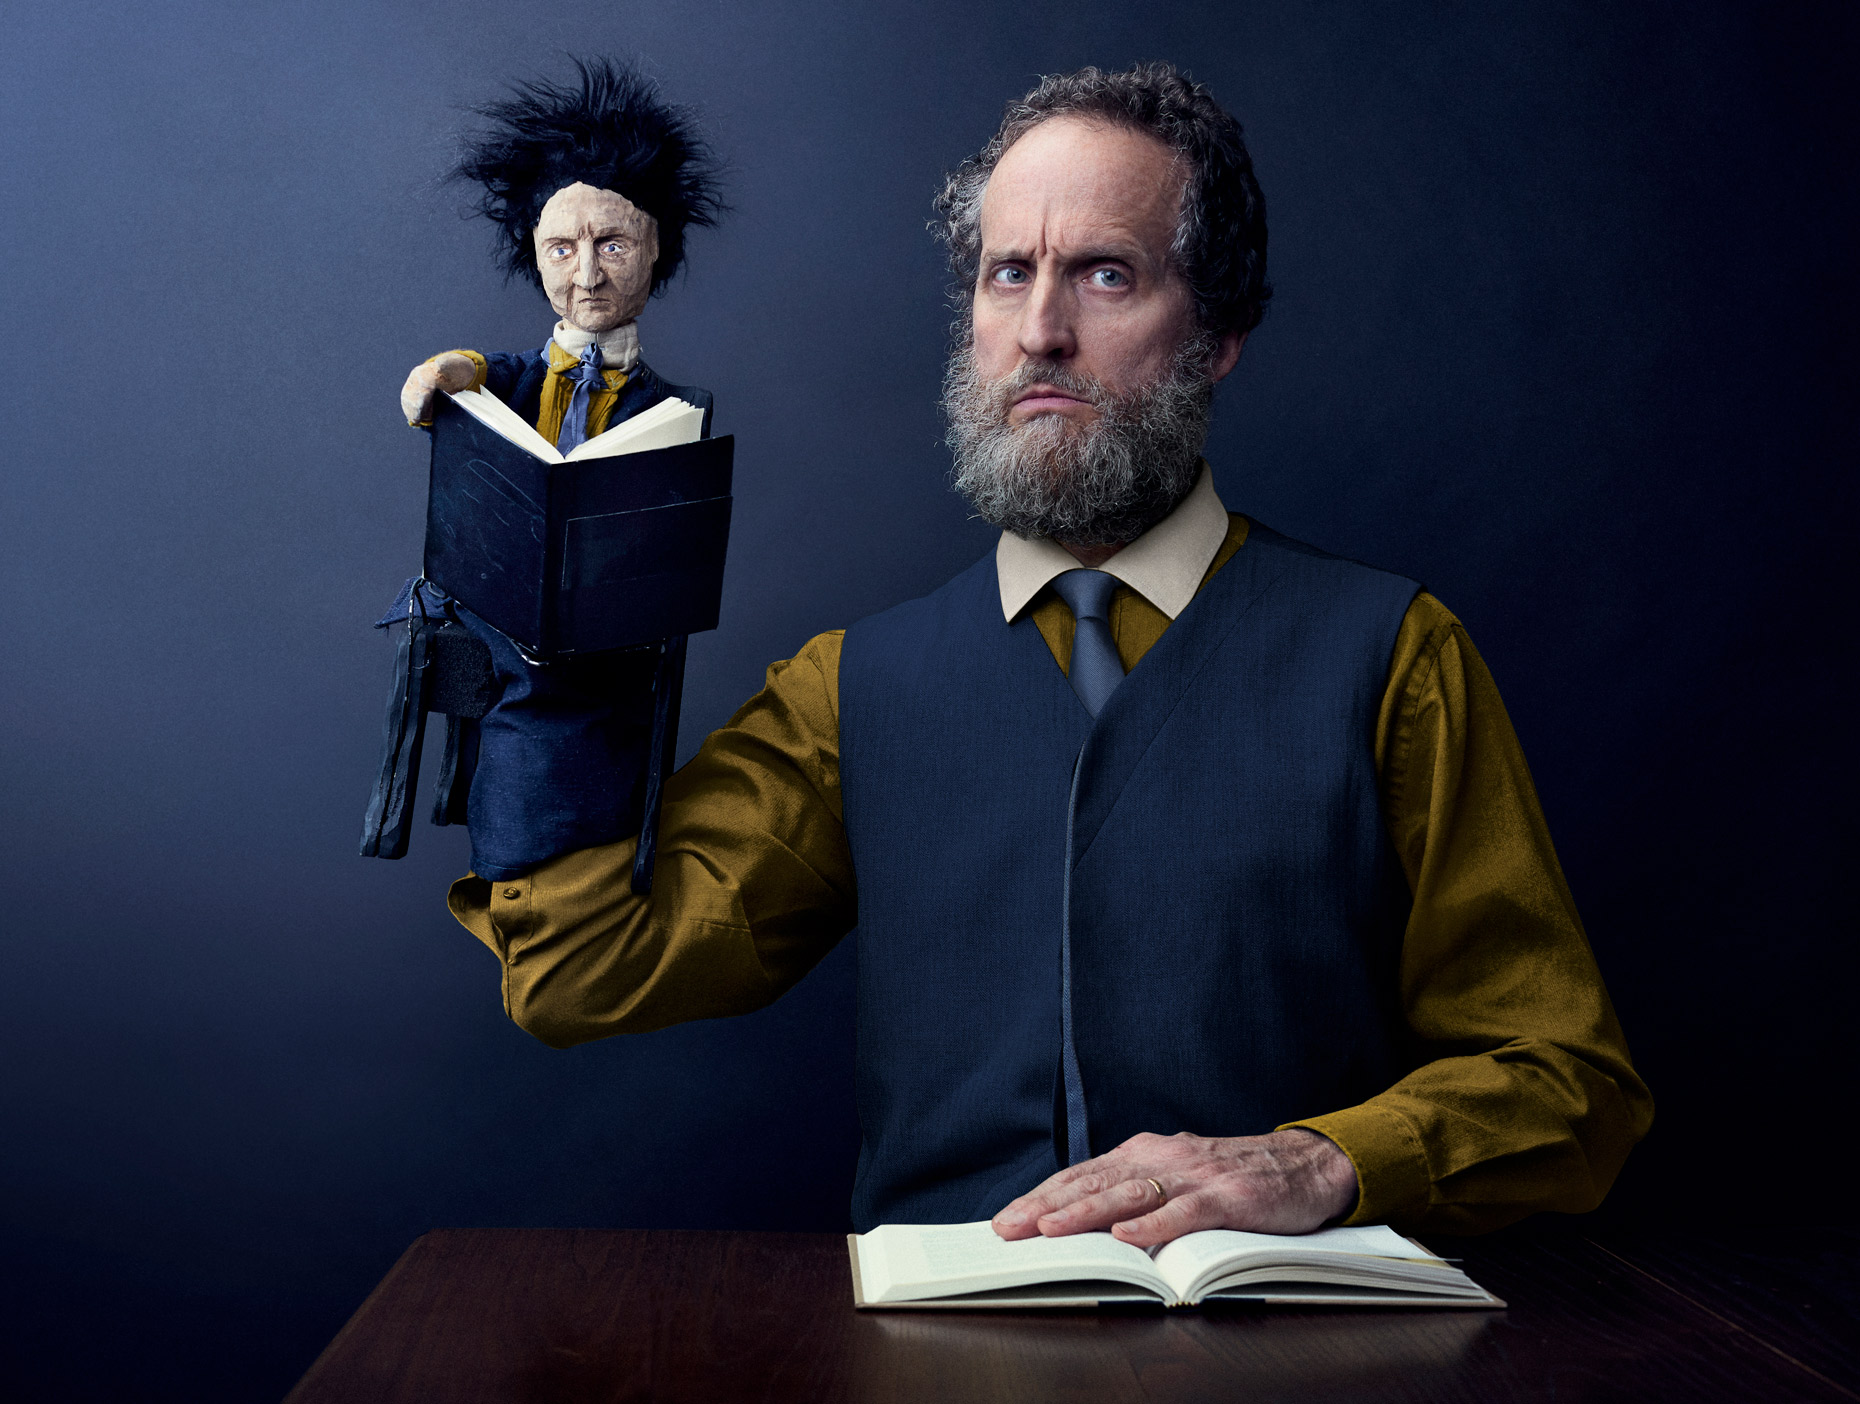 Blair Thomas Pupeteer with look alike puppet | Conceptual Portrait by Saverio Truglia